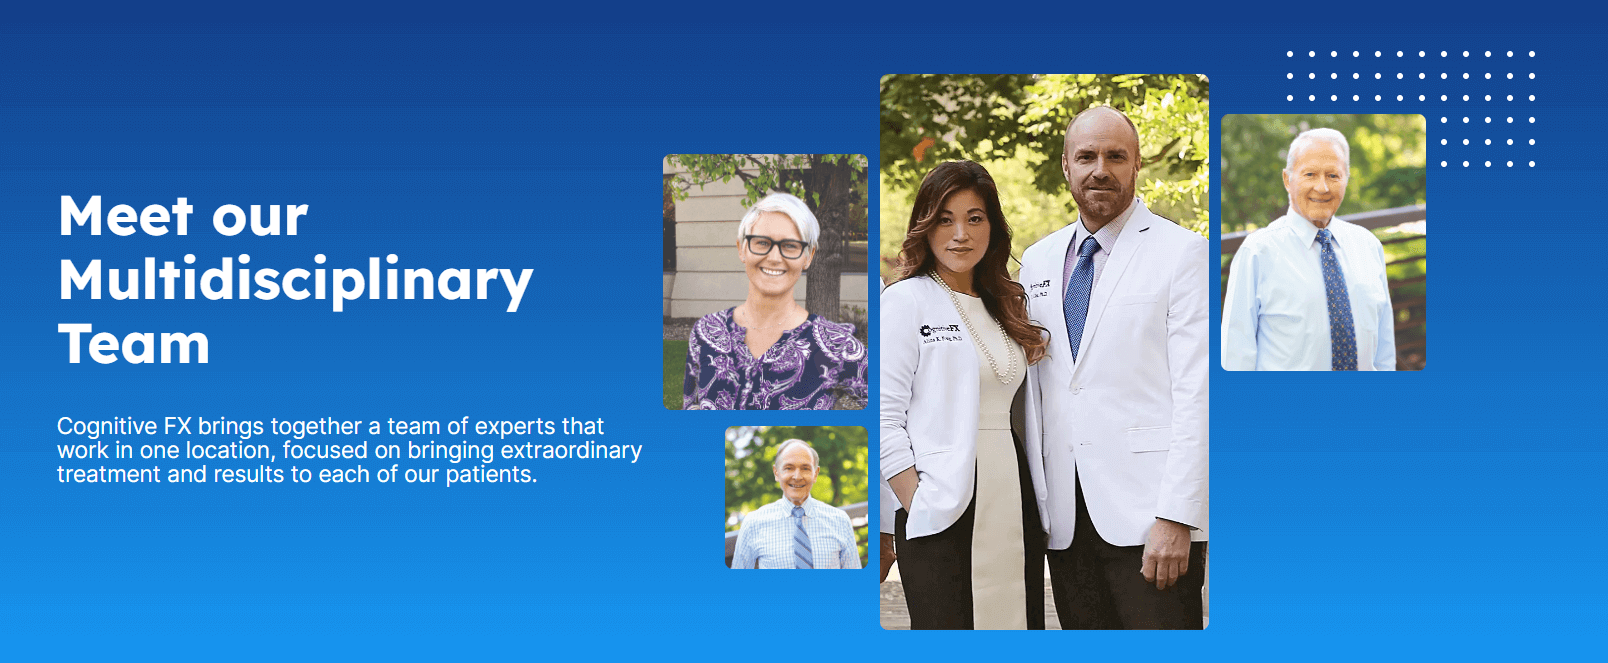 Meet Our Multidisciplinary Team: Cognitive FX brings together a team of experts focused on extraordinary treatment results